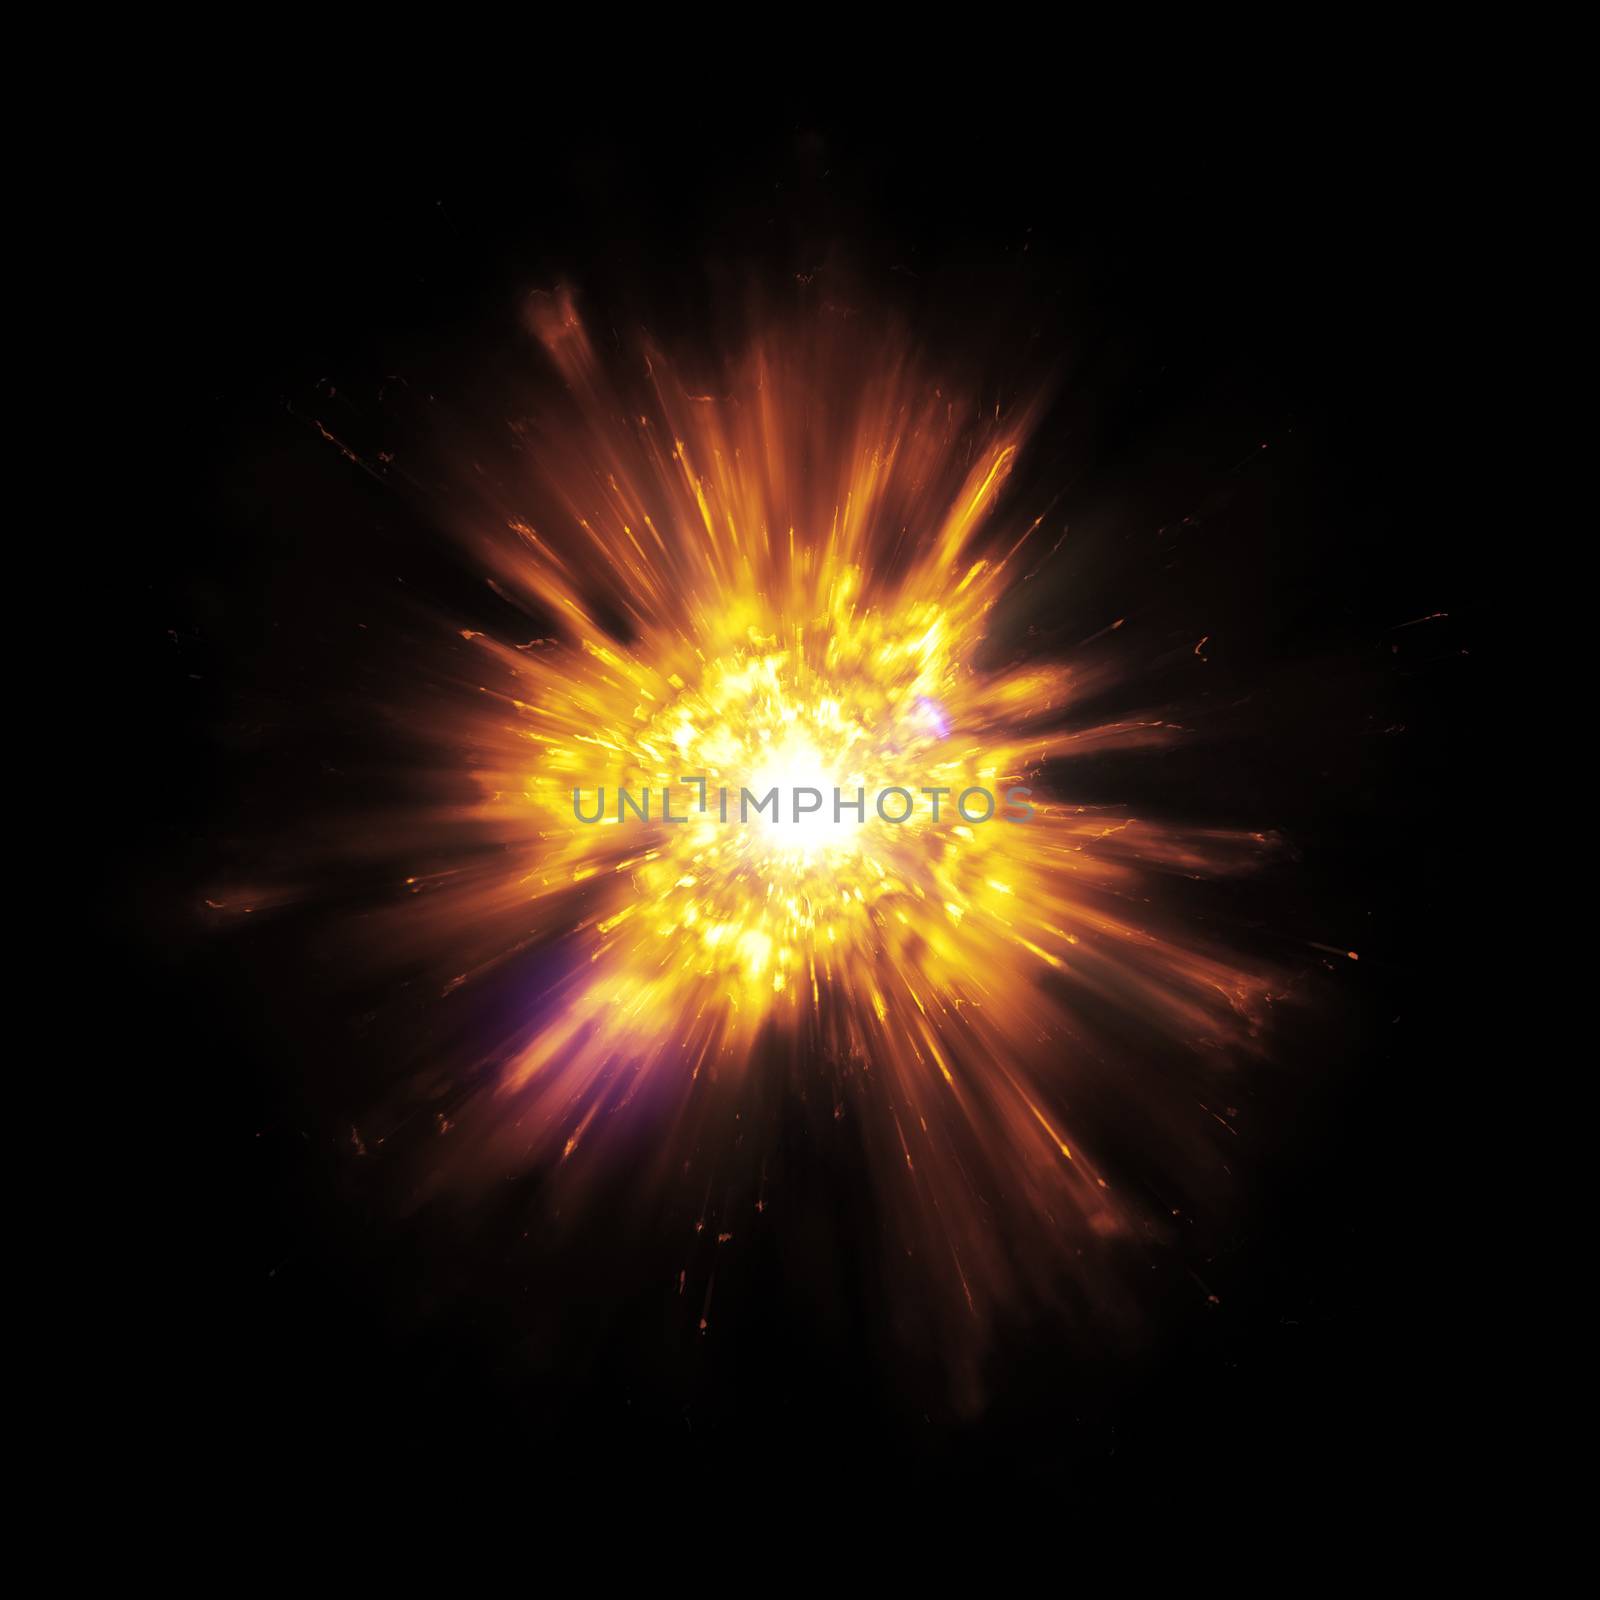 An image of a great explosion with flying sparks